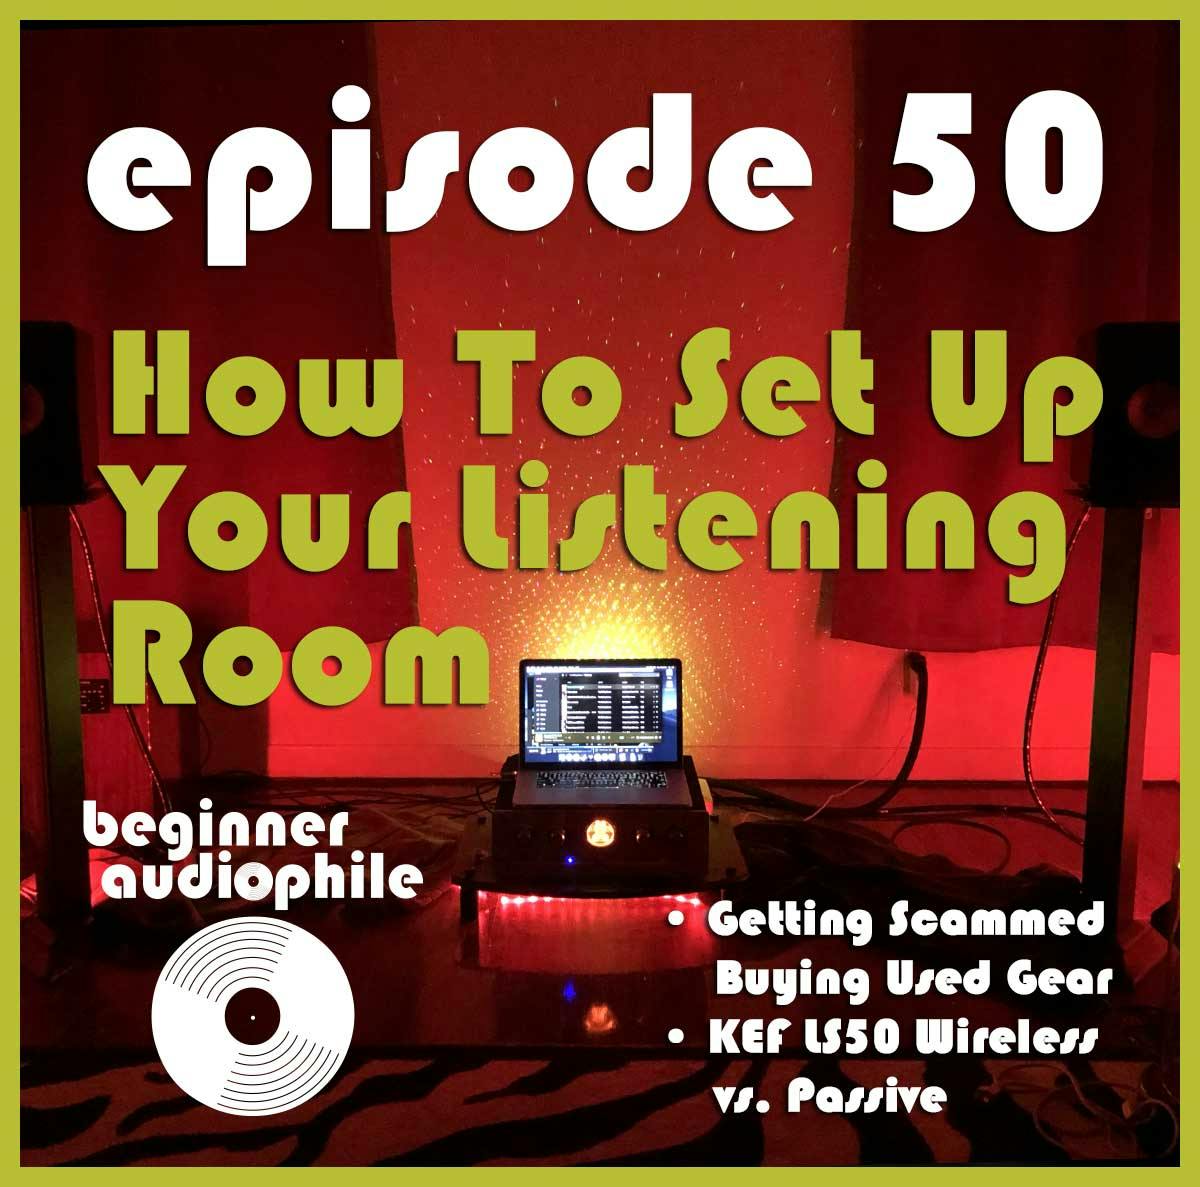 50: Setting Up A New Listening Room From Scratch | KEF LS50 Wireless vs. Passive | Getting Scammed with Used Gear